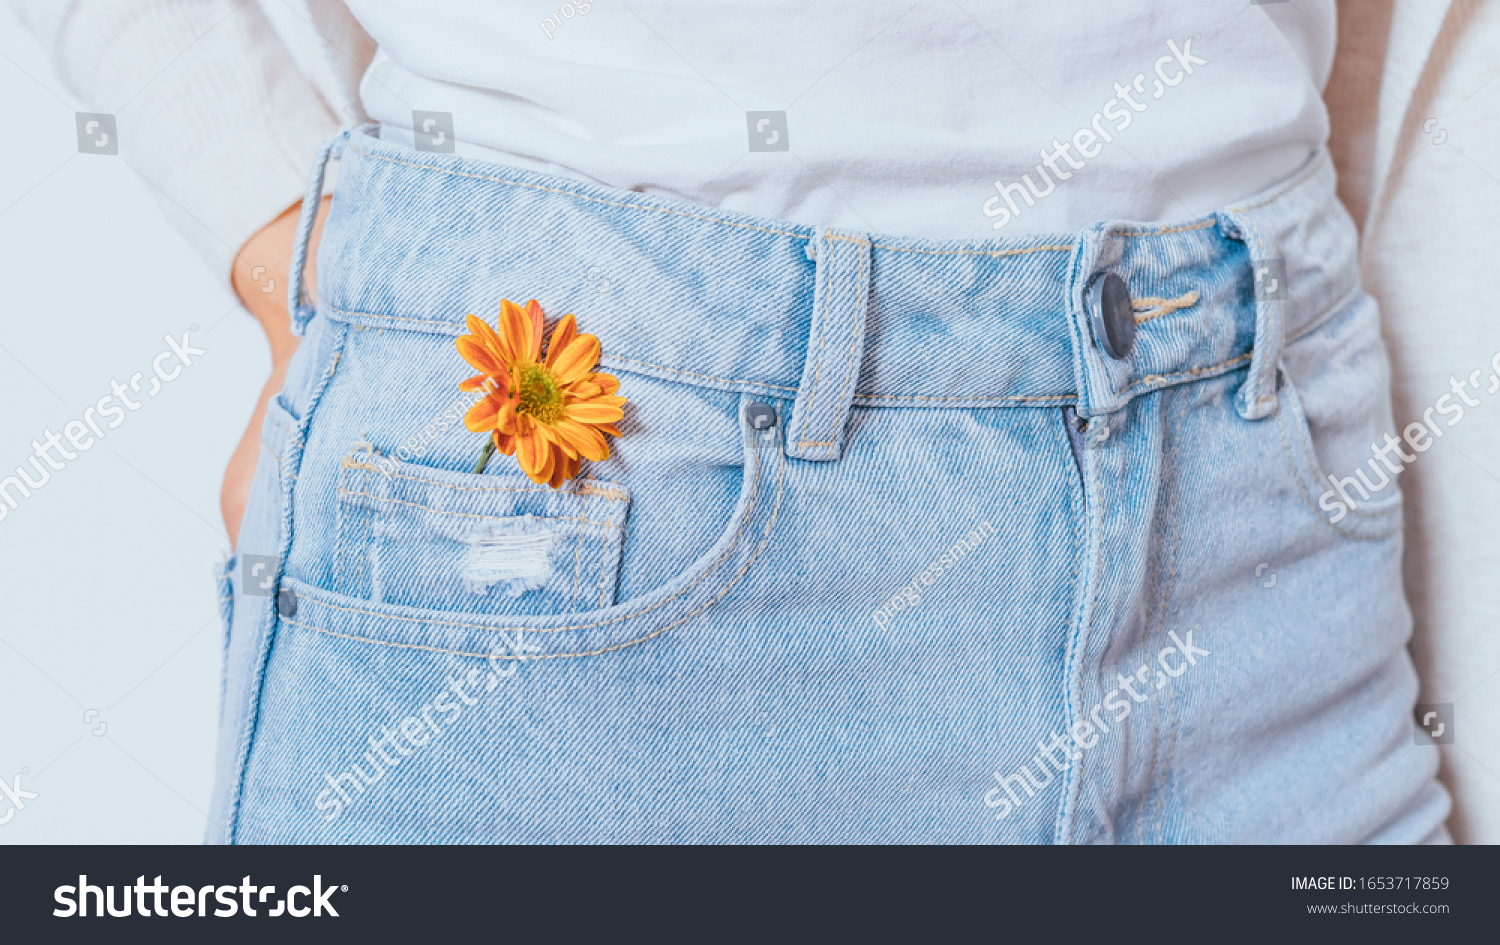 Bright orange flower in pocket blue jeans of young slender woman standing on white background, close-up. #1653717859